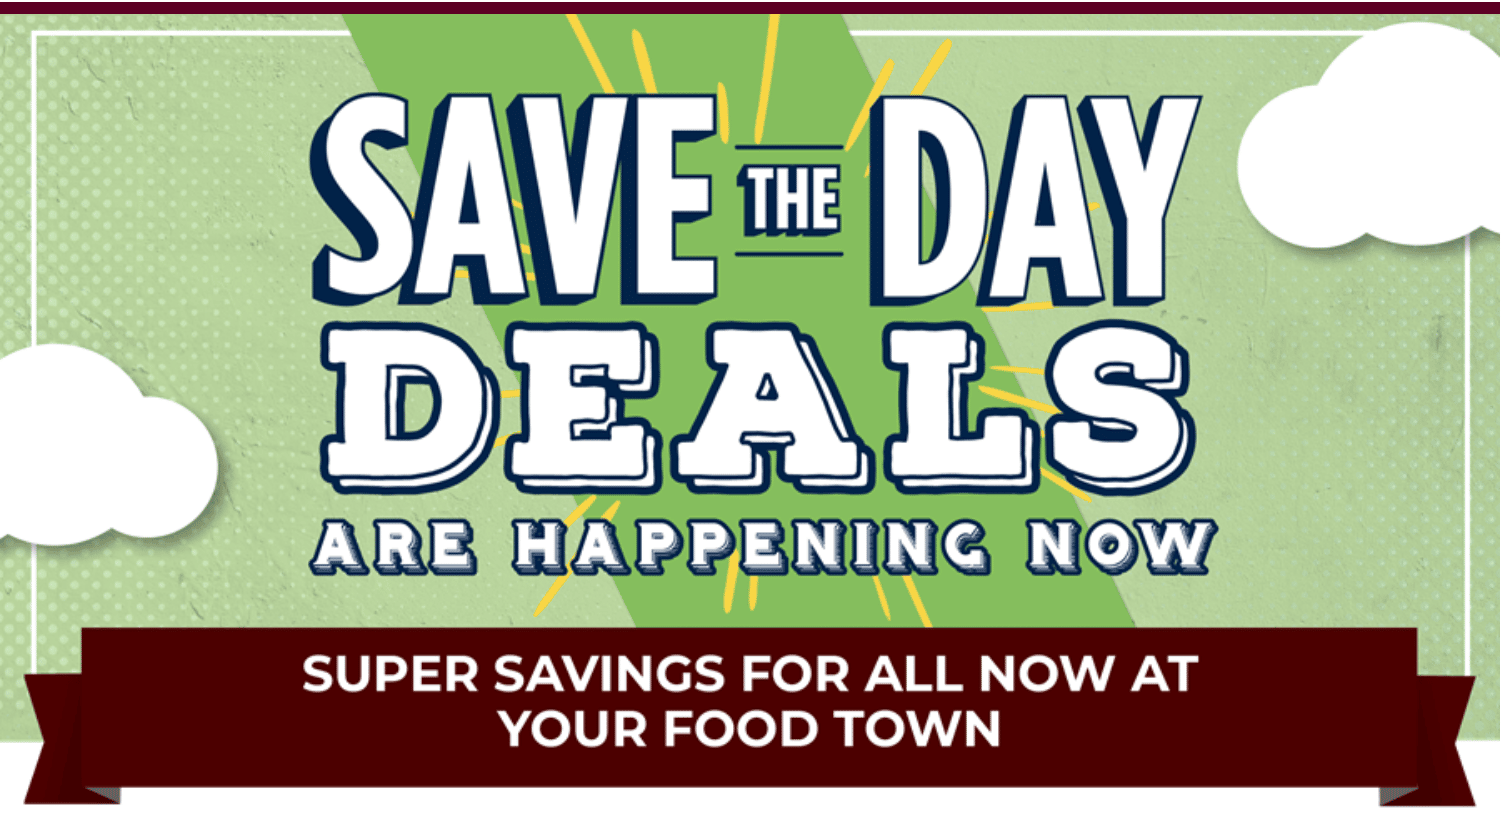 https://www.yourfoodtown.com/wp-content/uploads/2022/09/save-the-day.png